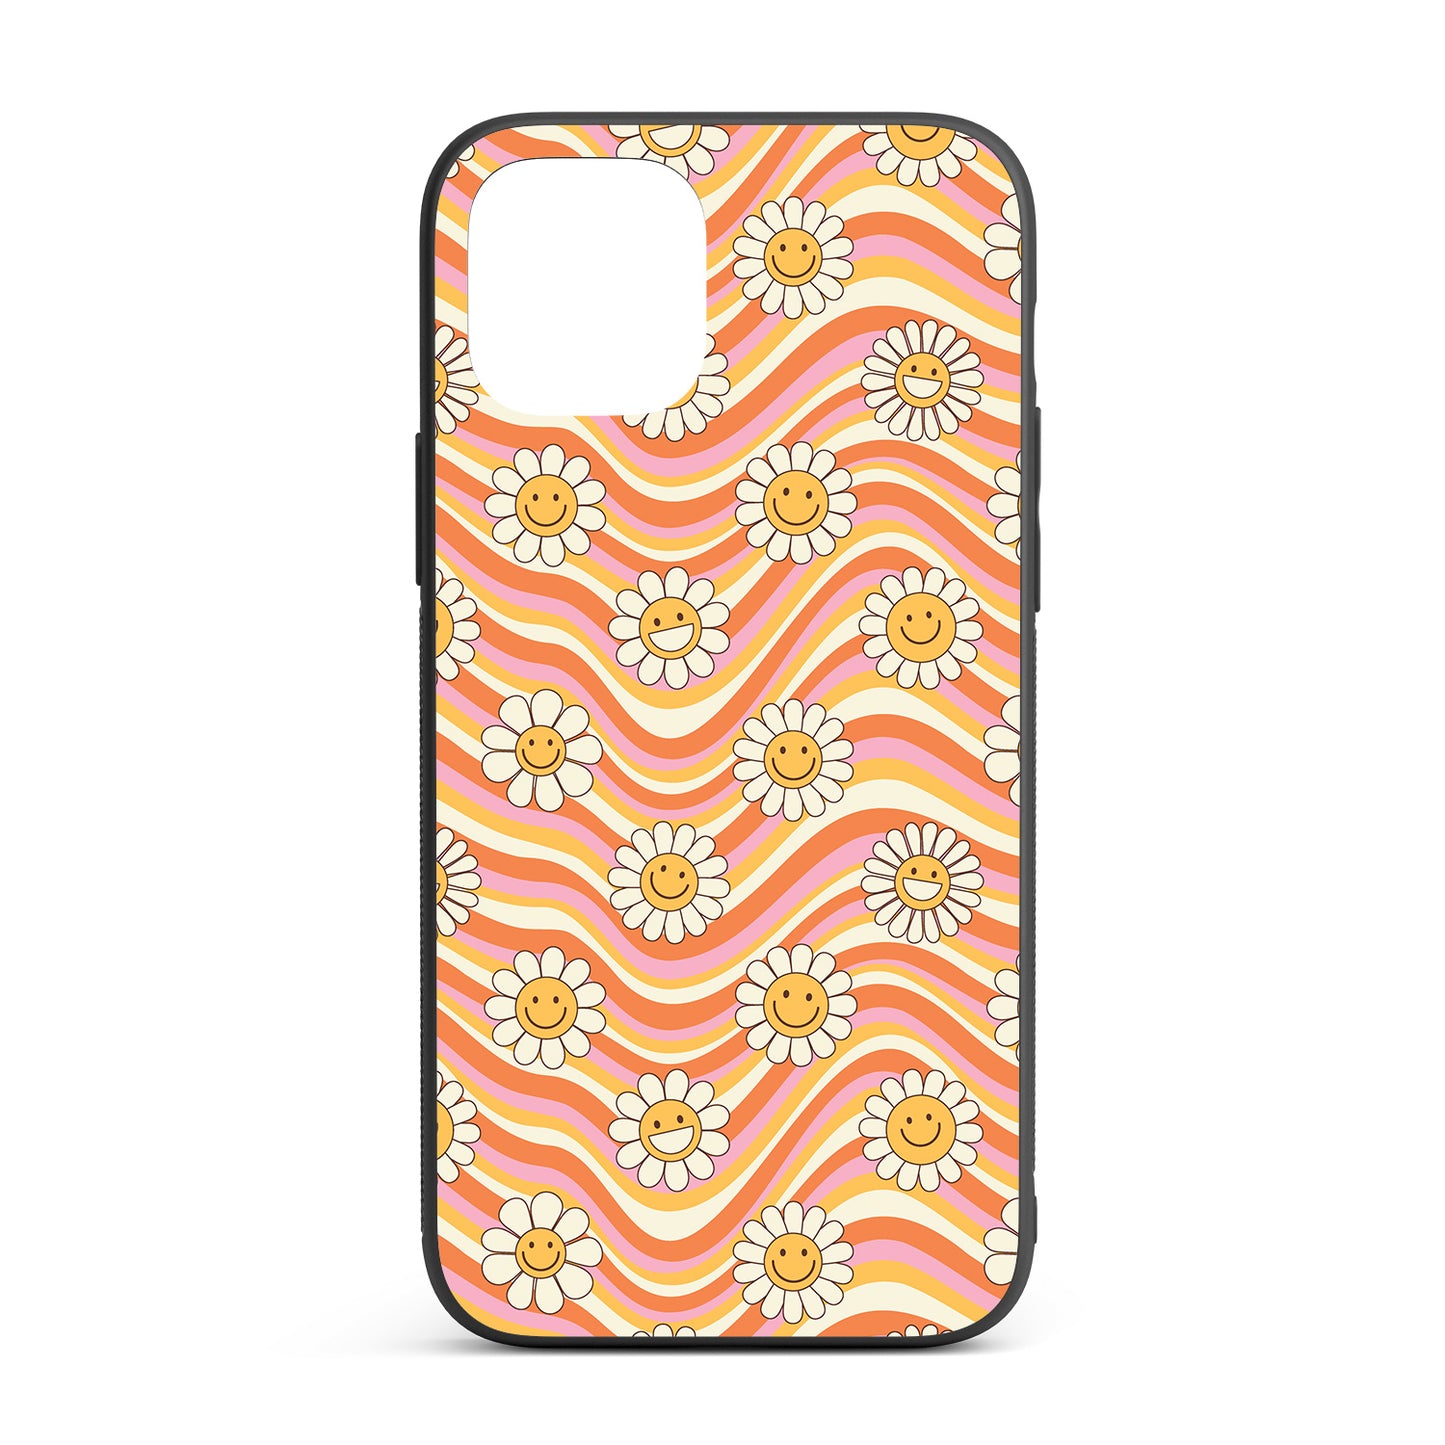 Morning Delight iPhone glass case